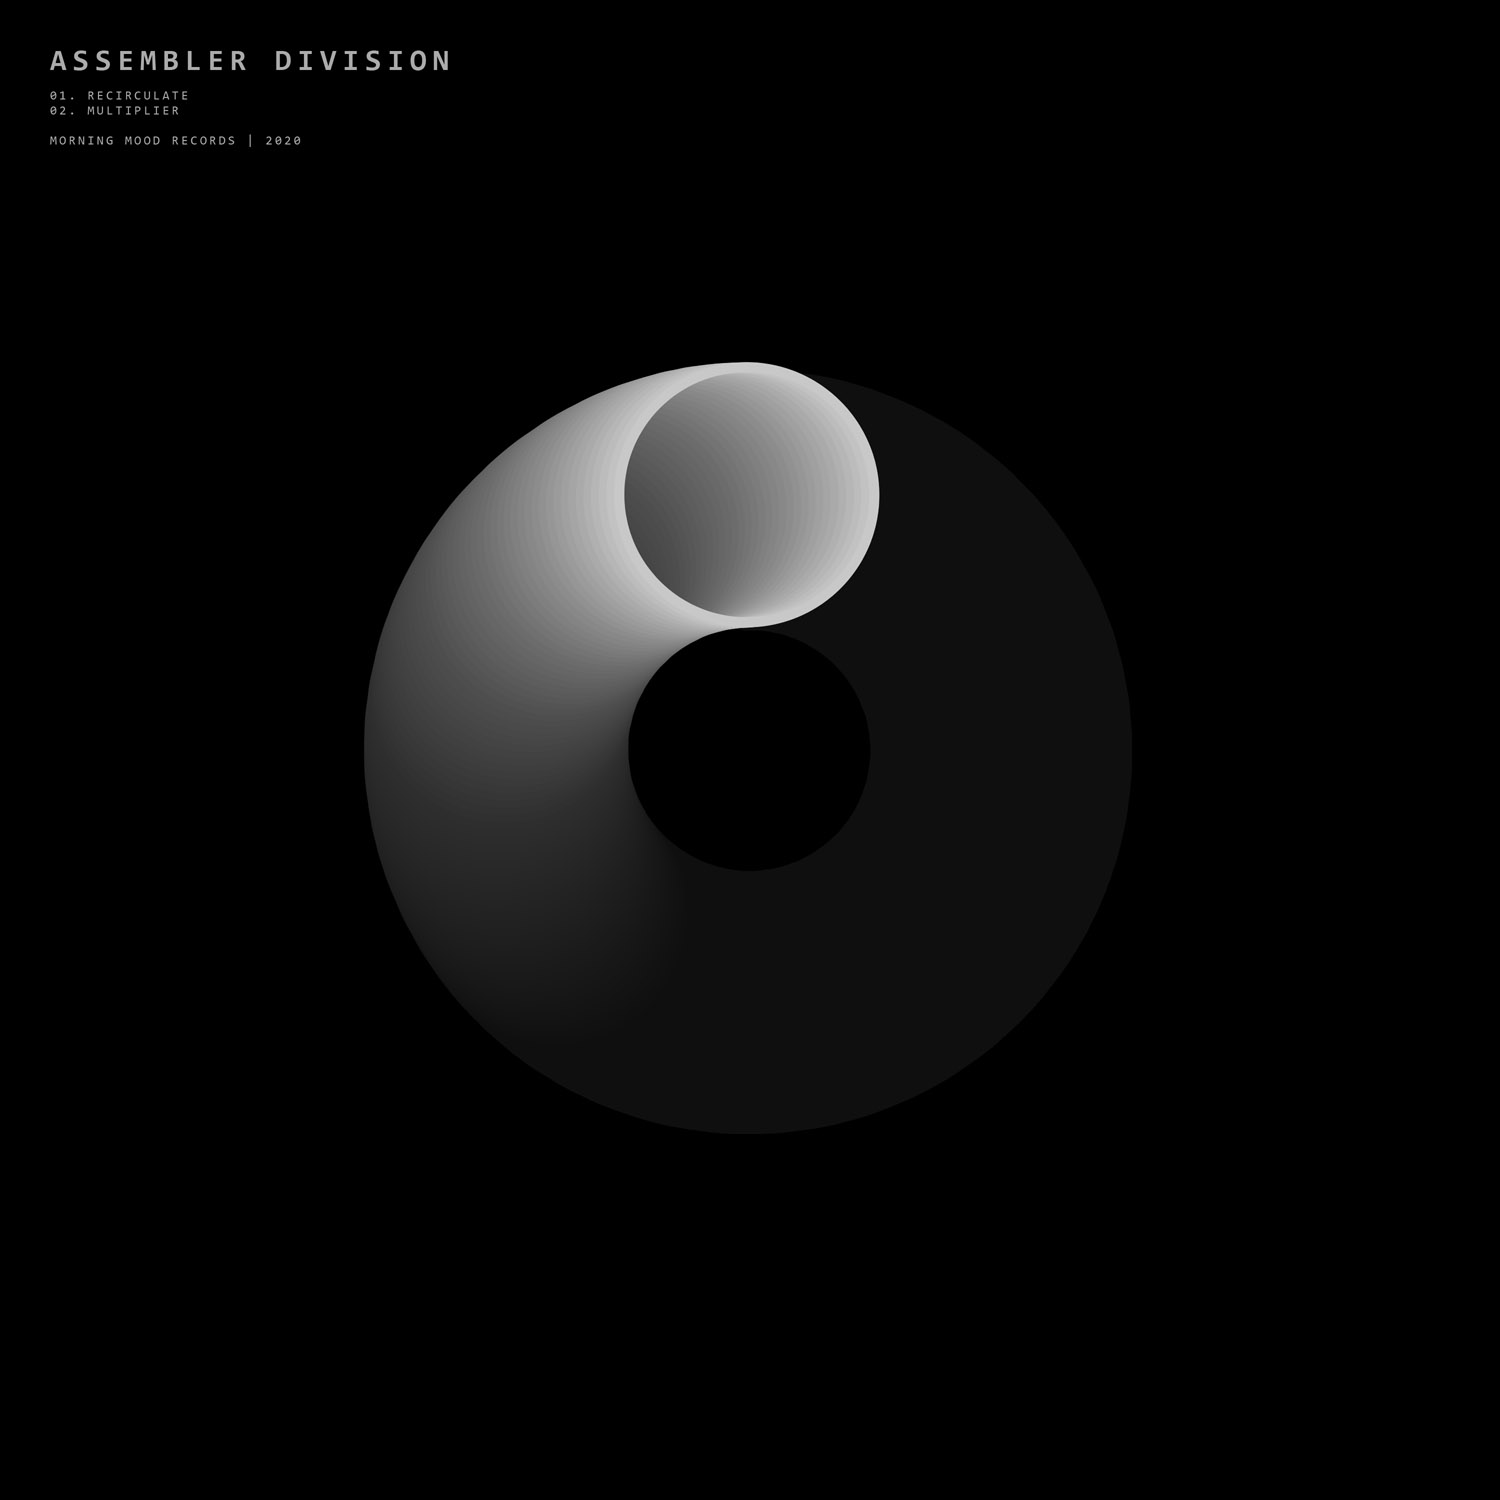 image cover: Assembler Division - Recirculate / Morning Mood Records